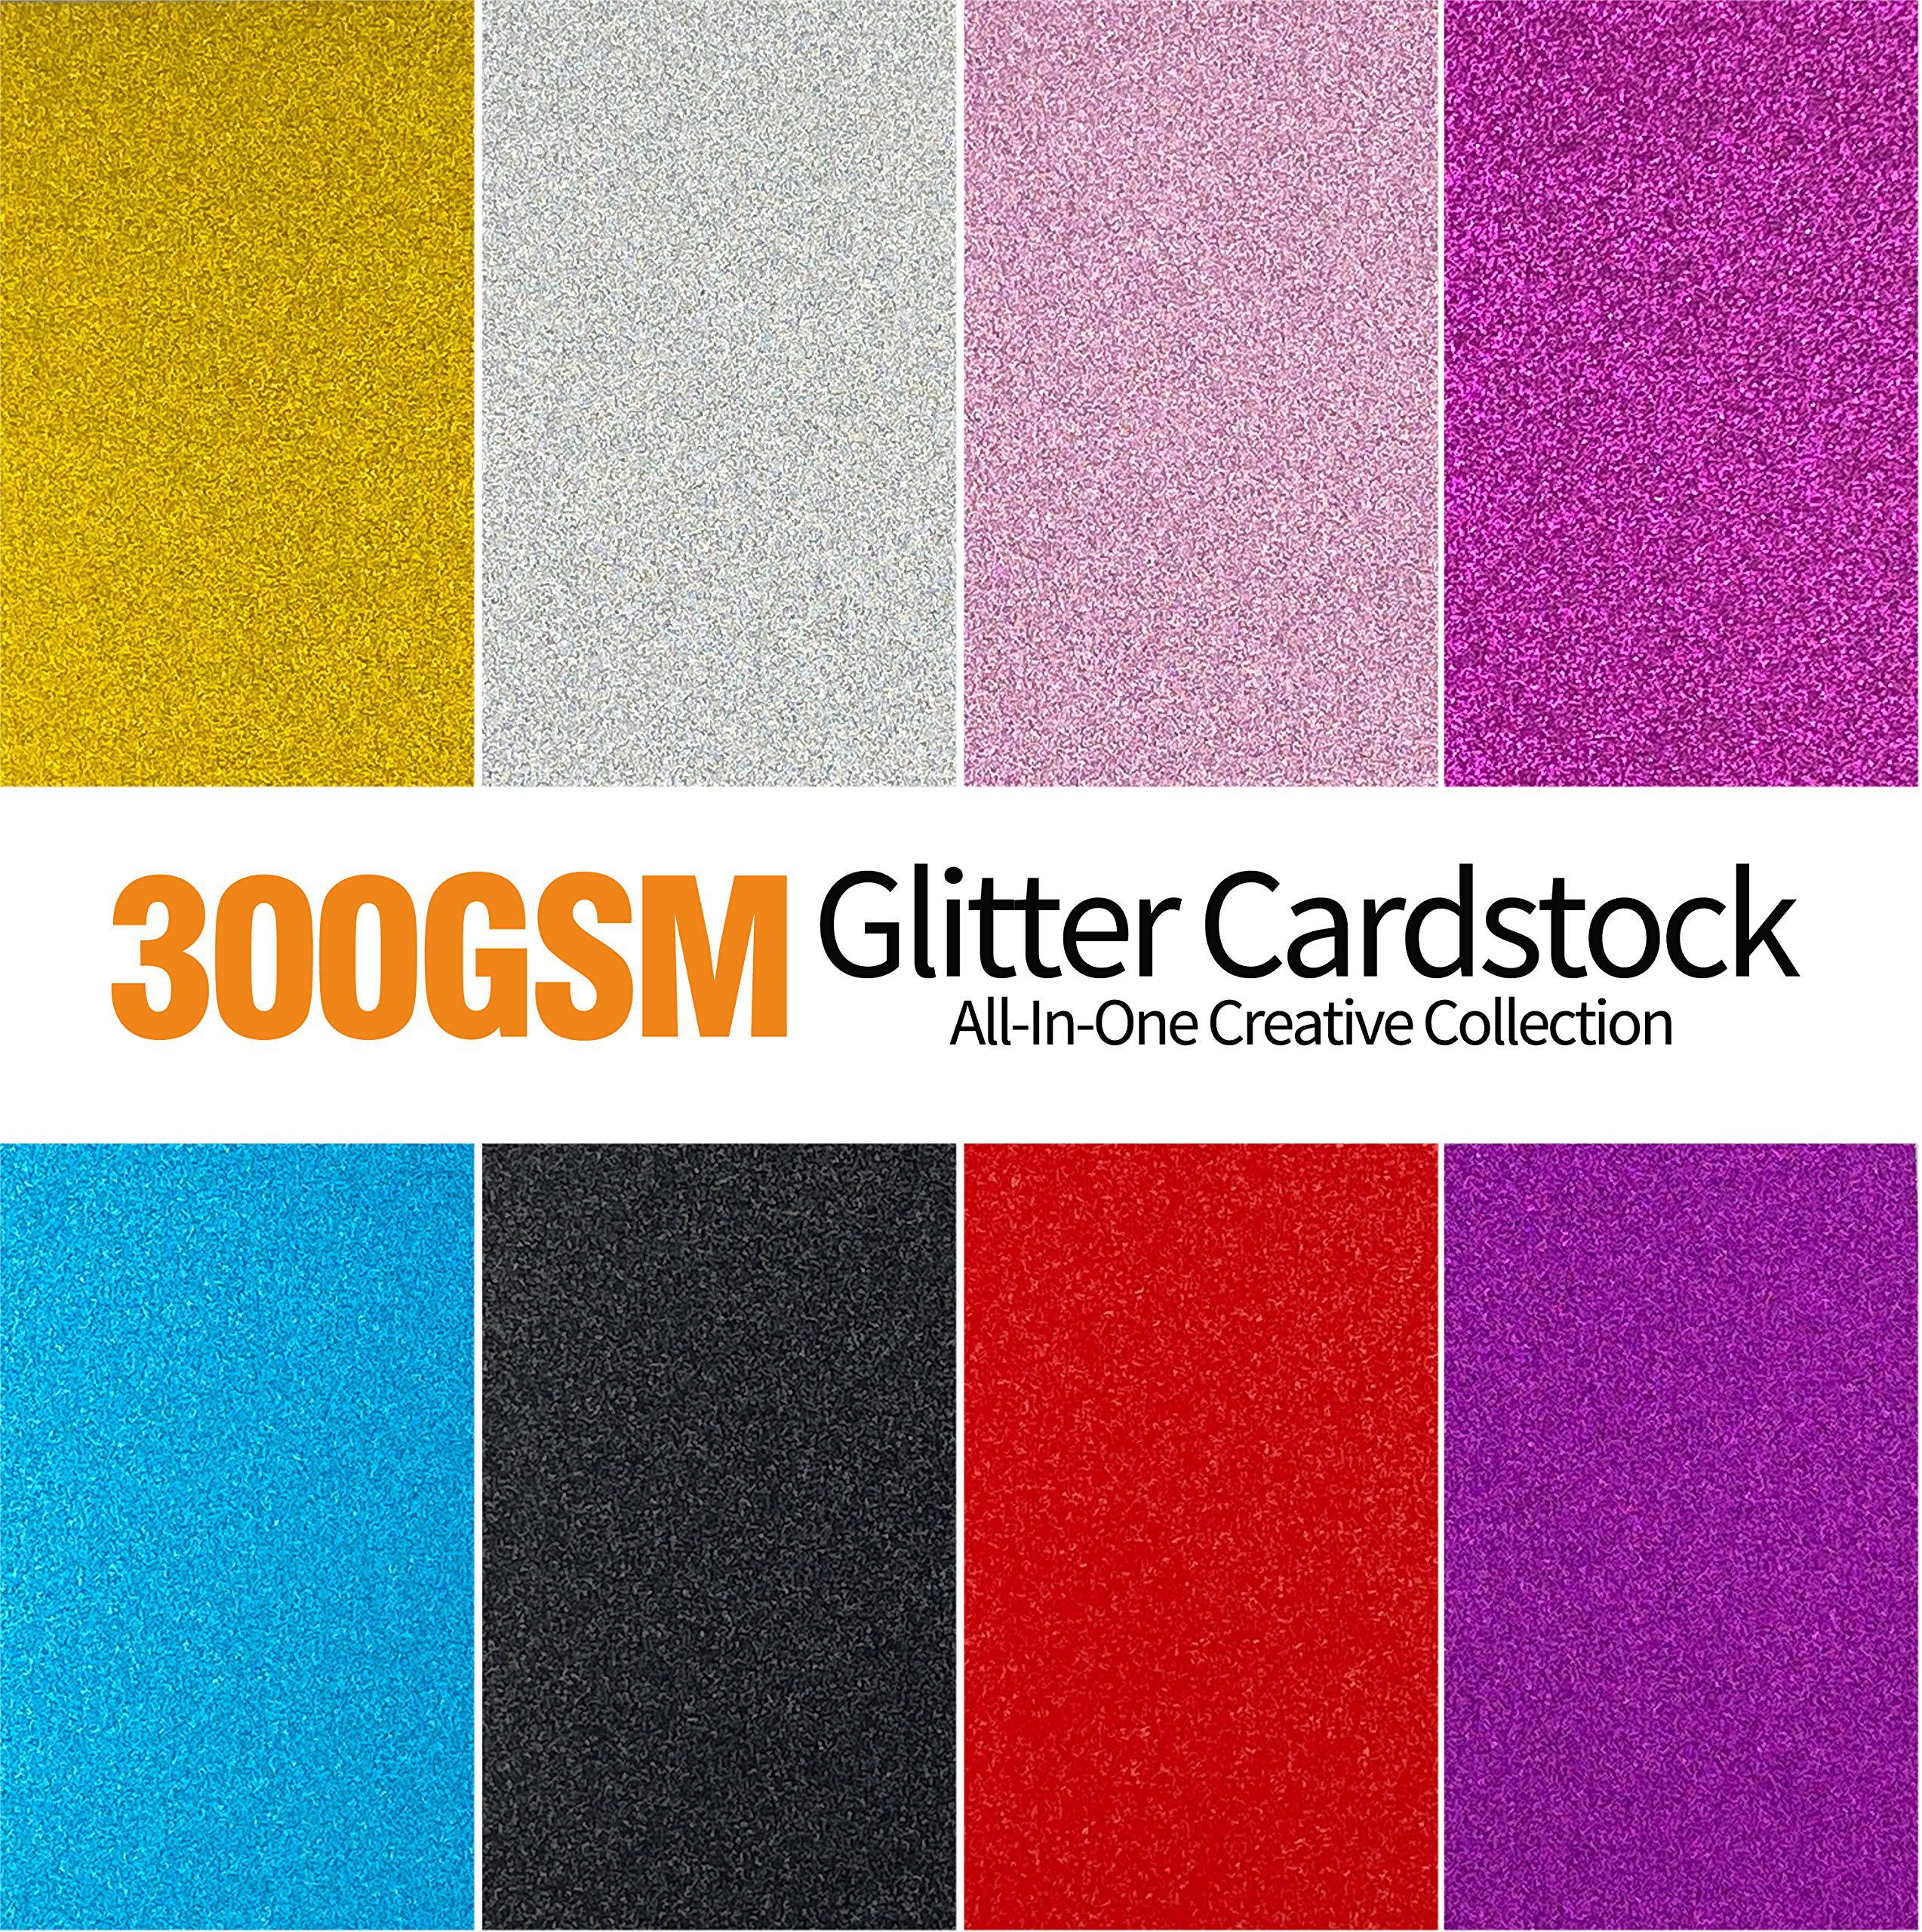 toolbuddy heavyweight glitter cardstock paper - 110lb. / 300gsm - 50 sheets  a4 colored craft card stock for craft